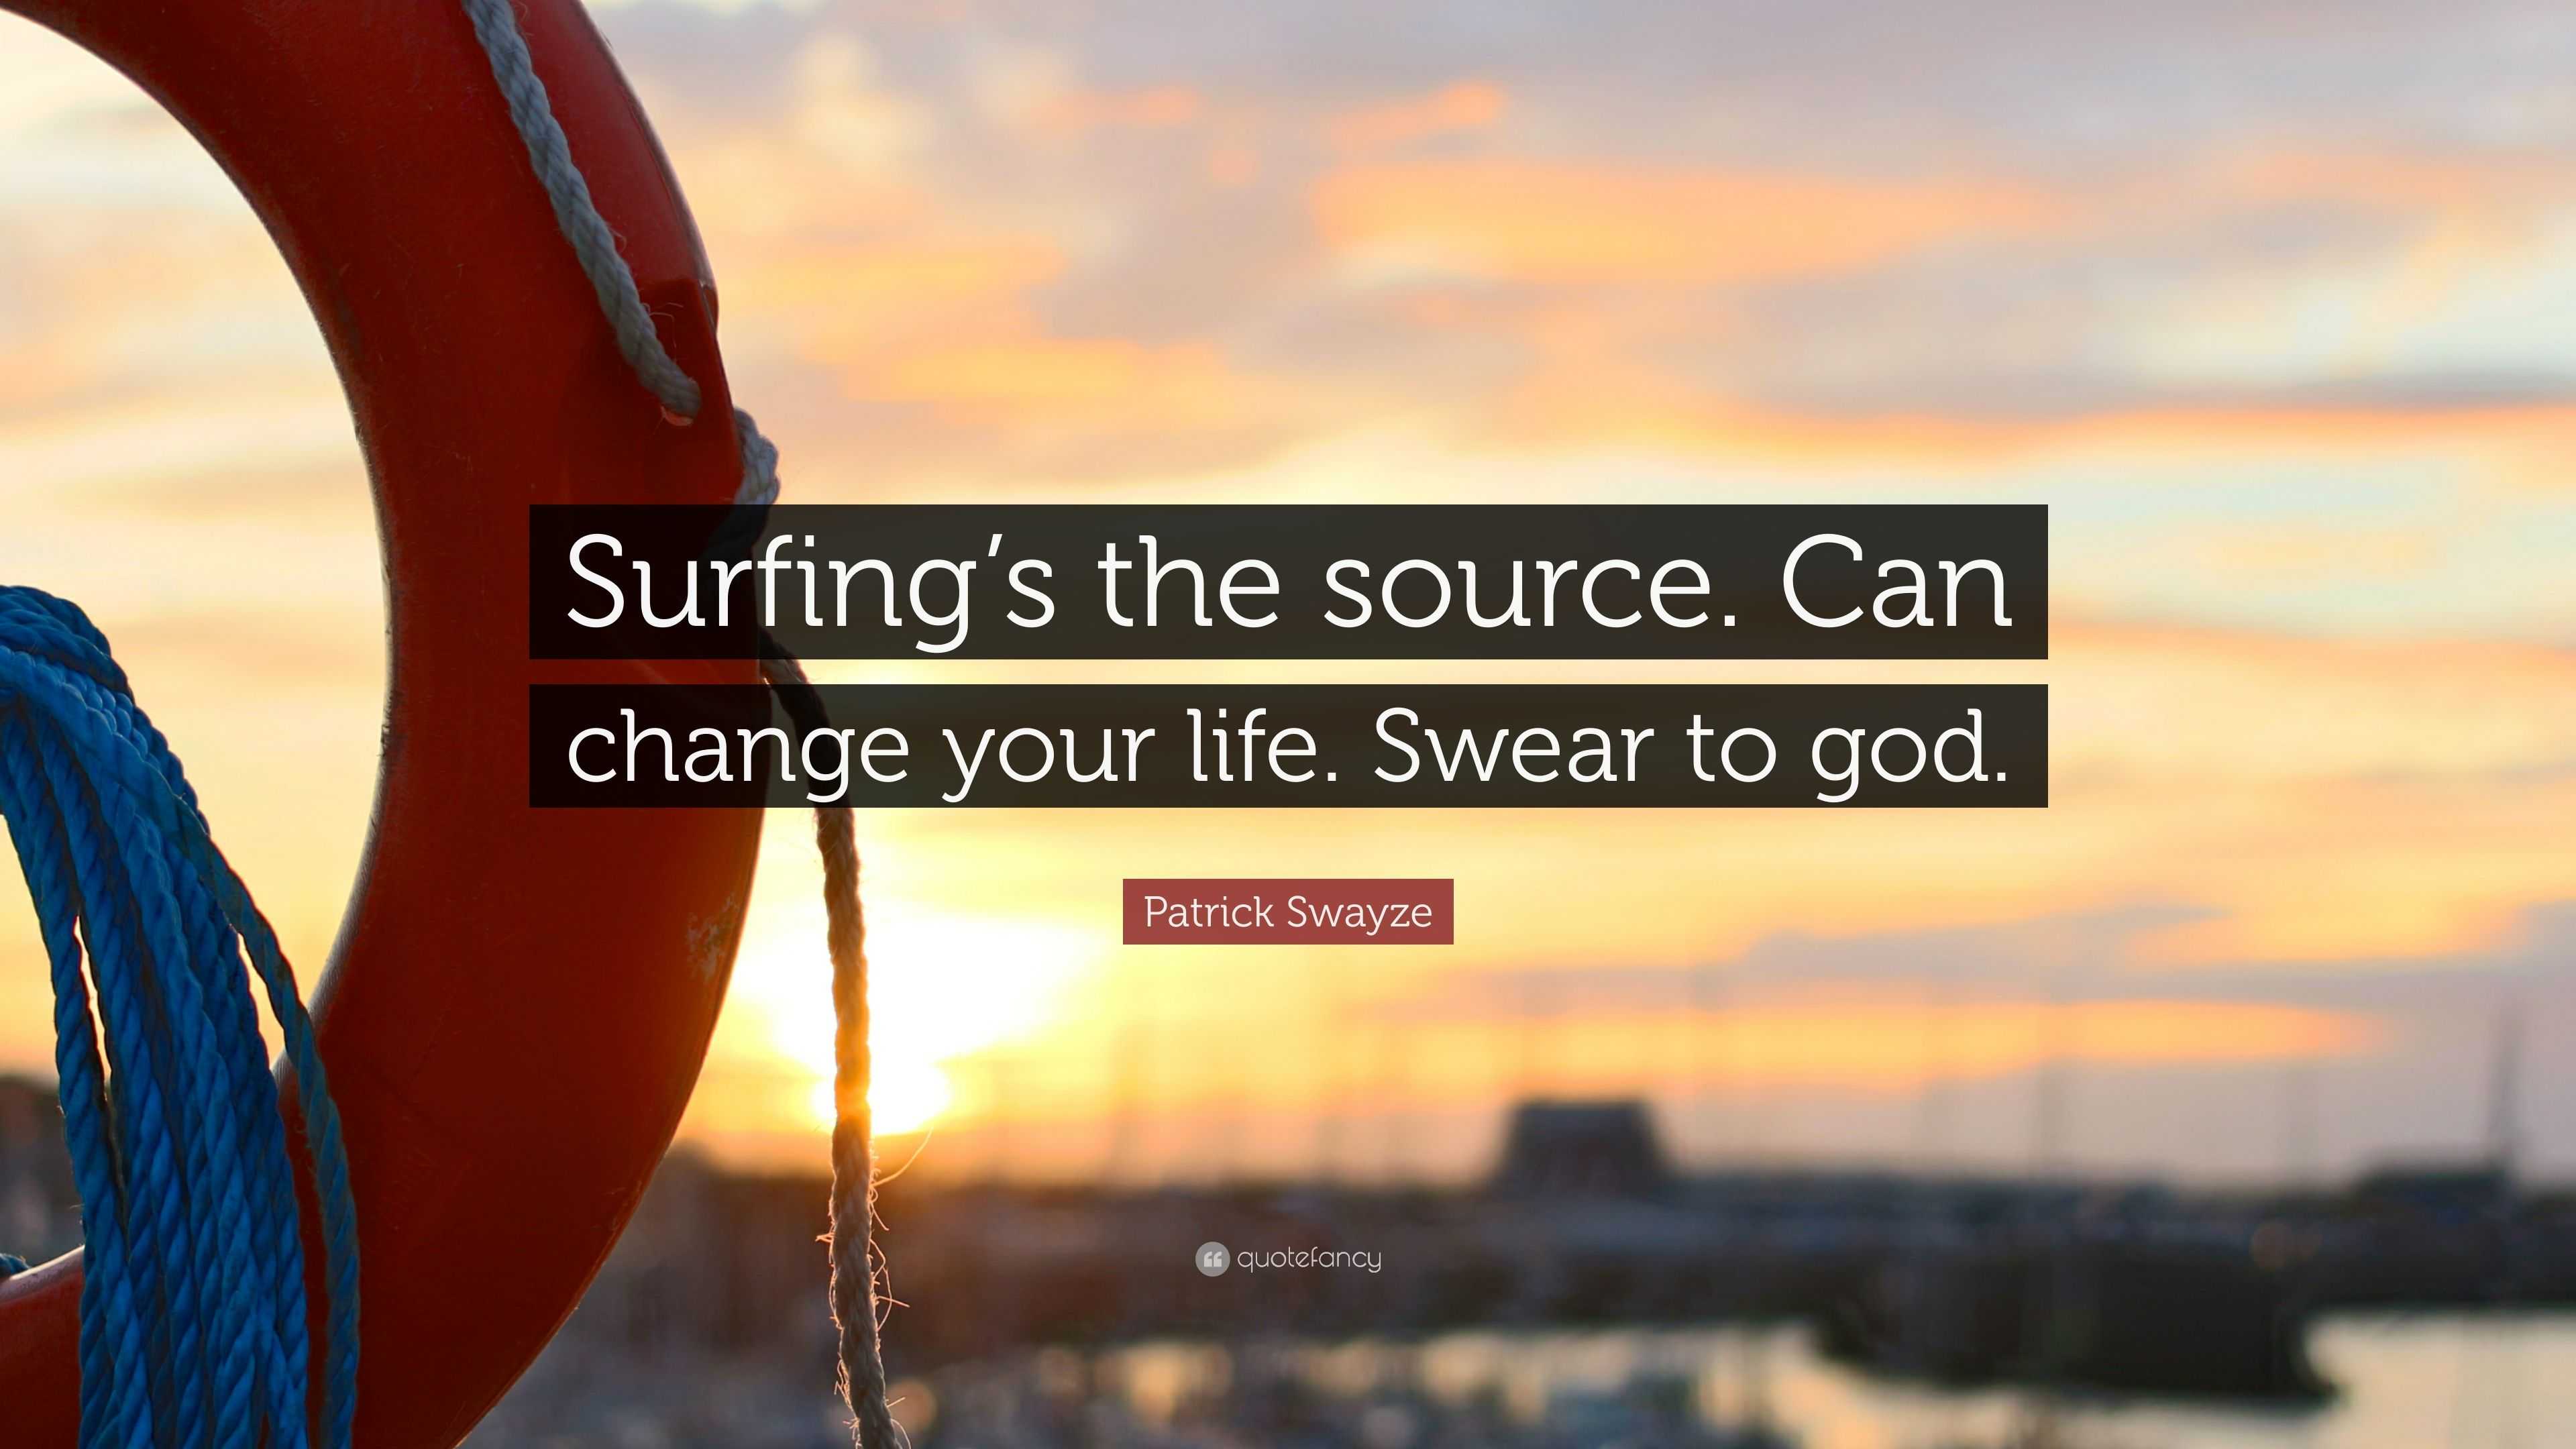 Patrick Swayze Quote “Surfing s the source Can change your life Swear to